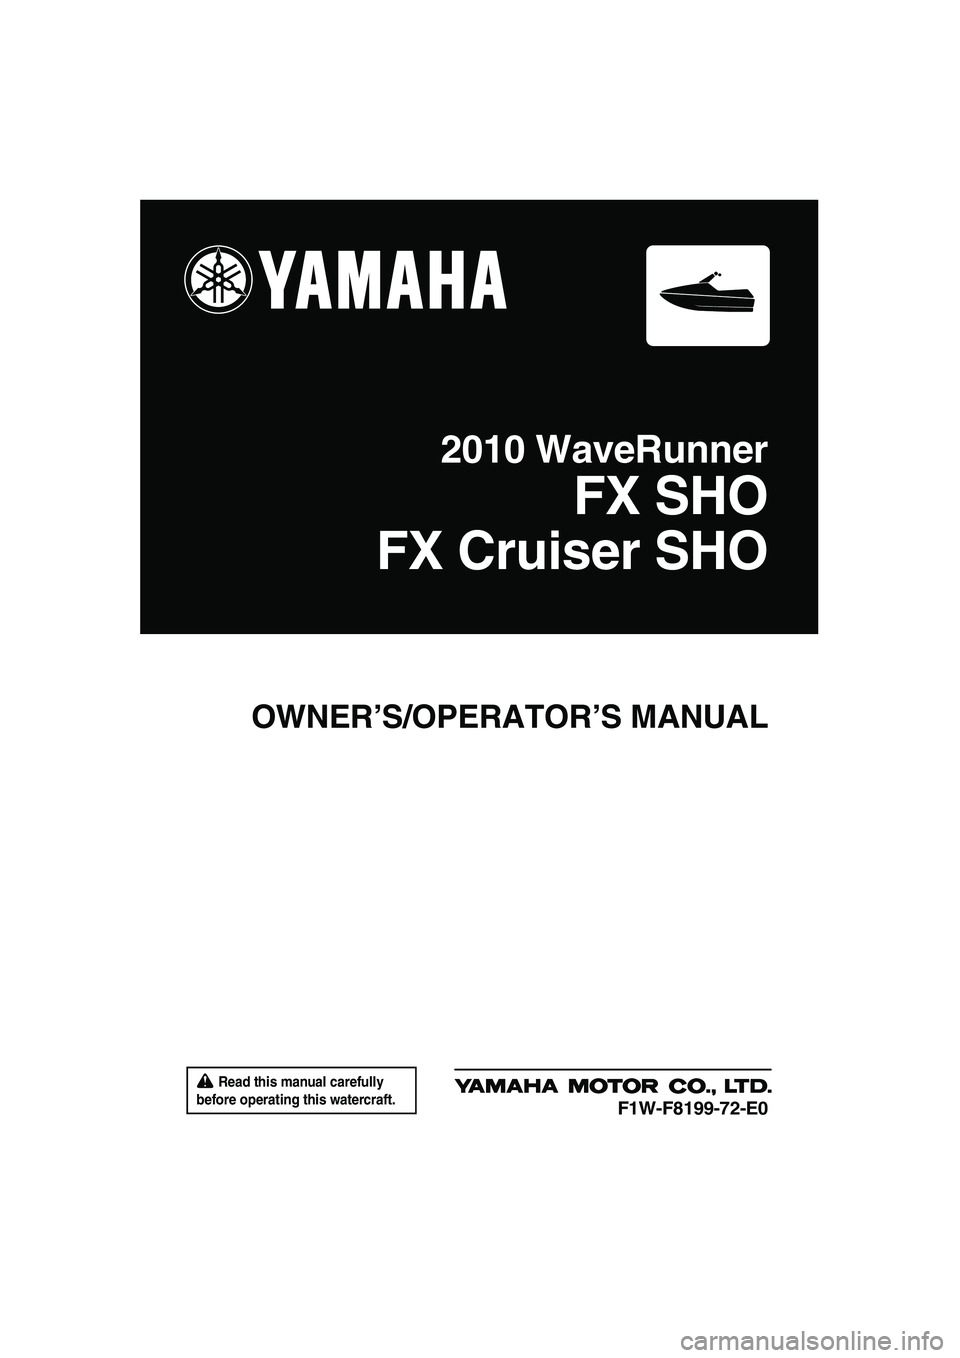 YAMAHA SVHO 2010  Owners Manual  Read this manual carefully 
before operating this watercraft.
OWNER’S/OPERATOR’S MANUAL
2010 WaveRunner
FX SHO
FX Cruiser SHO
F1W-F8199-72-E0
UF1W72E0.book  Page 1  Monday, June 1, 2009  1:42 PM 